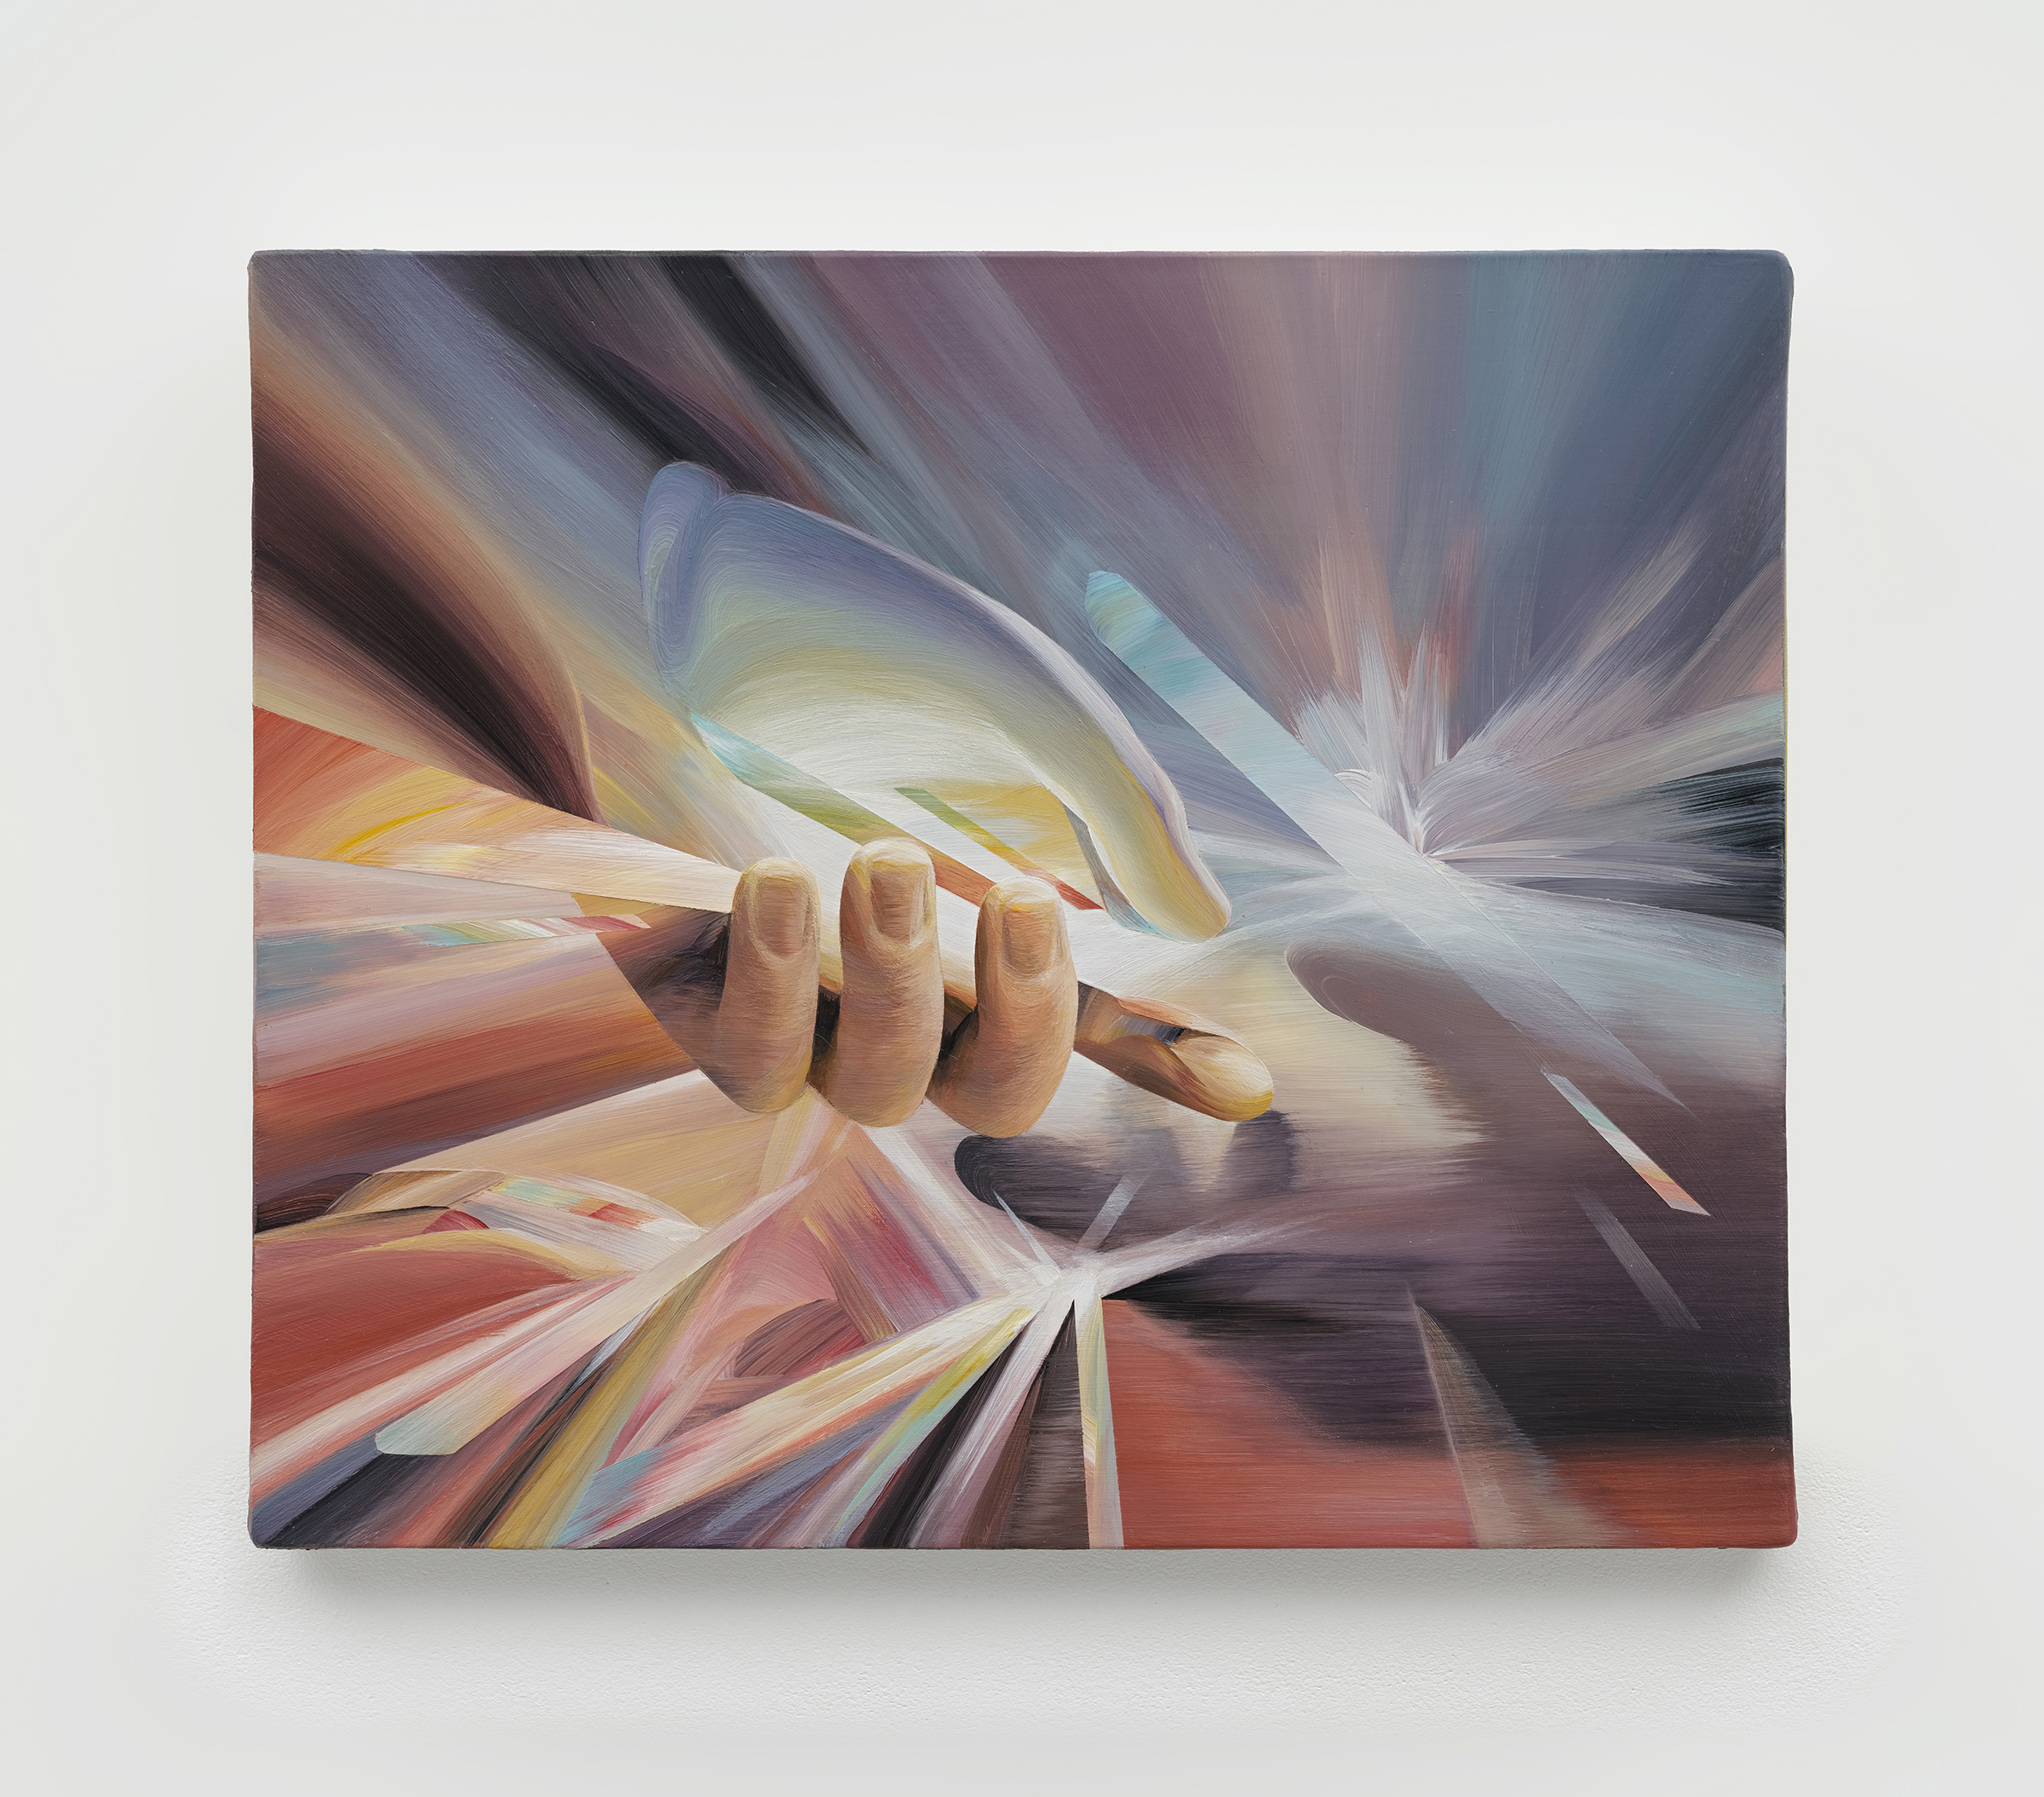 Huang Ko Wei, Spark, 2023, acrylic on canvas, 22 x 26 cm, 8 5/8 x 10 1/4 in.